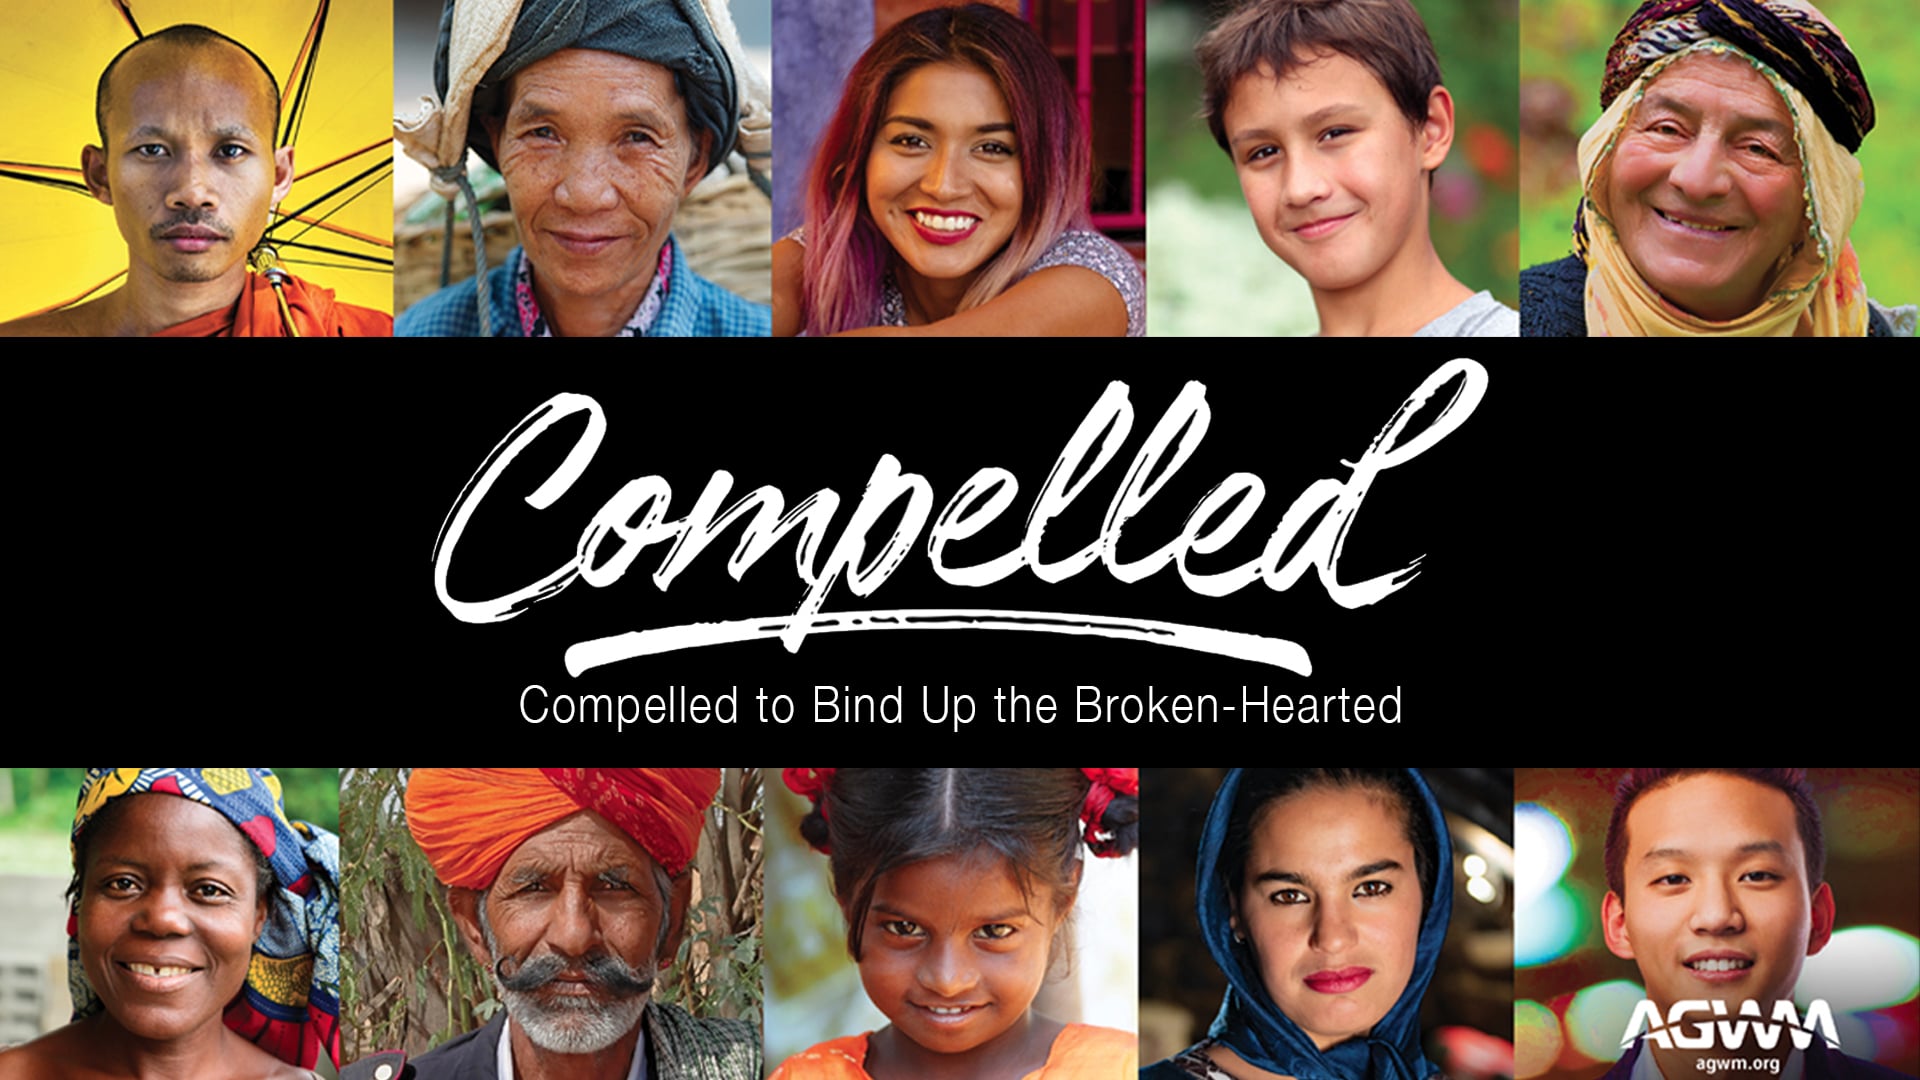 Compelled to Bind Up the Broken-Hearted